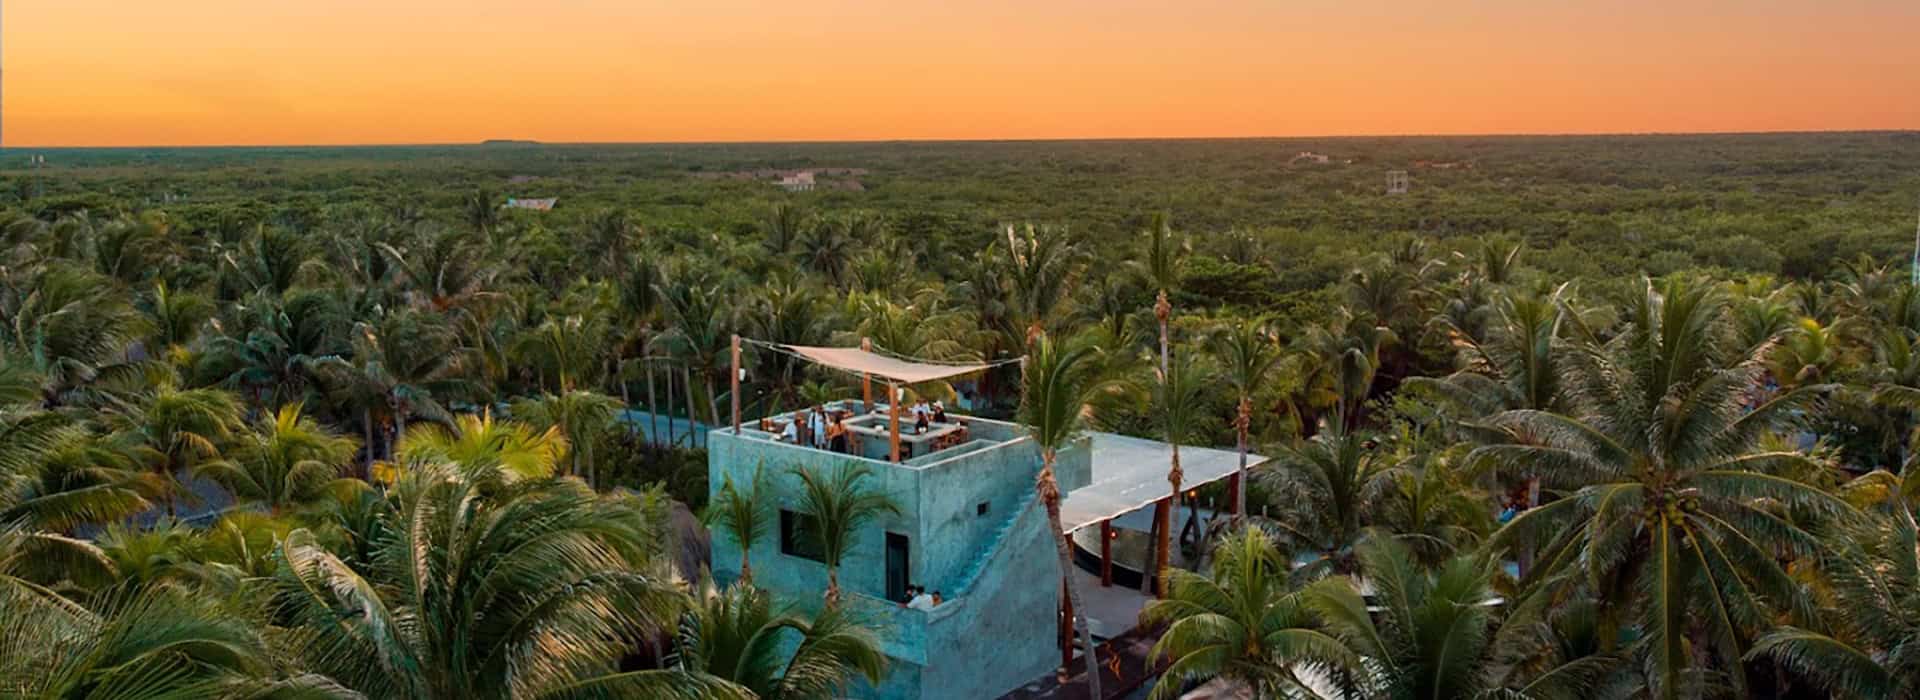 The golden hour at Maya Tulum located in nature